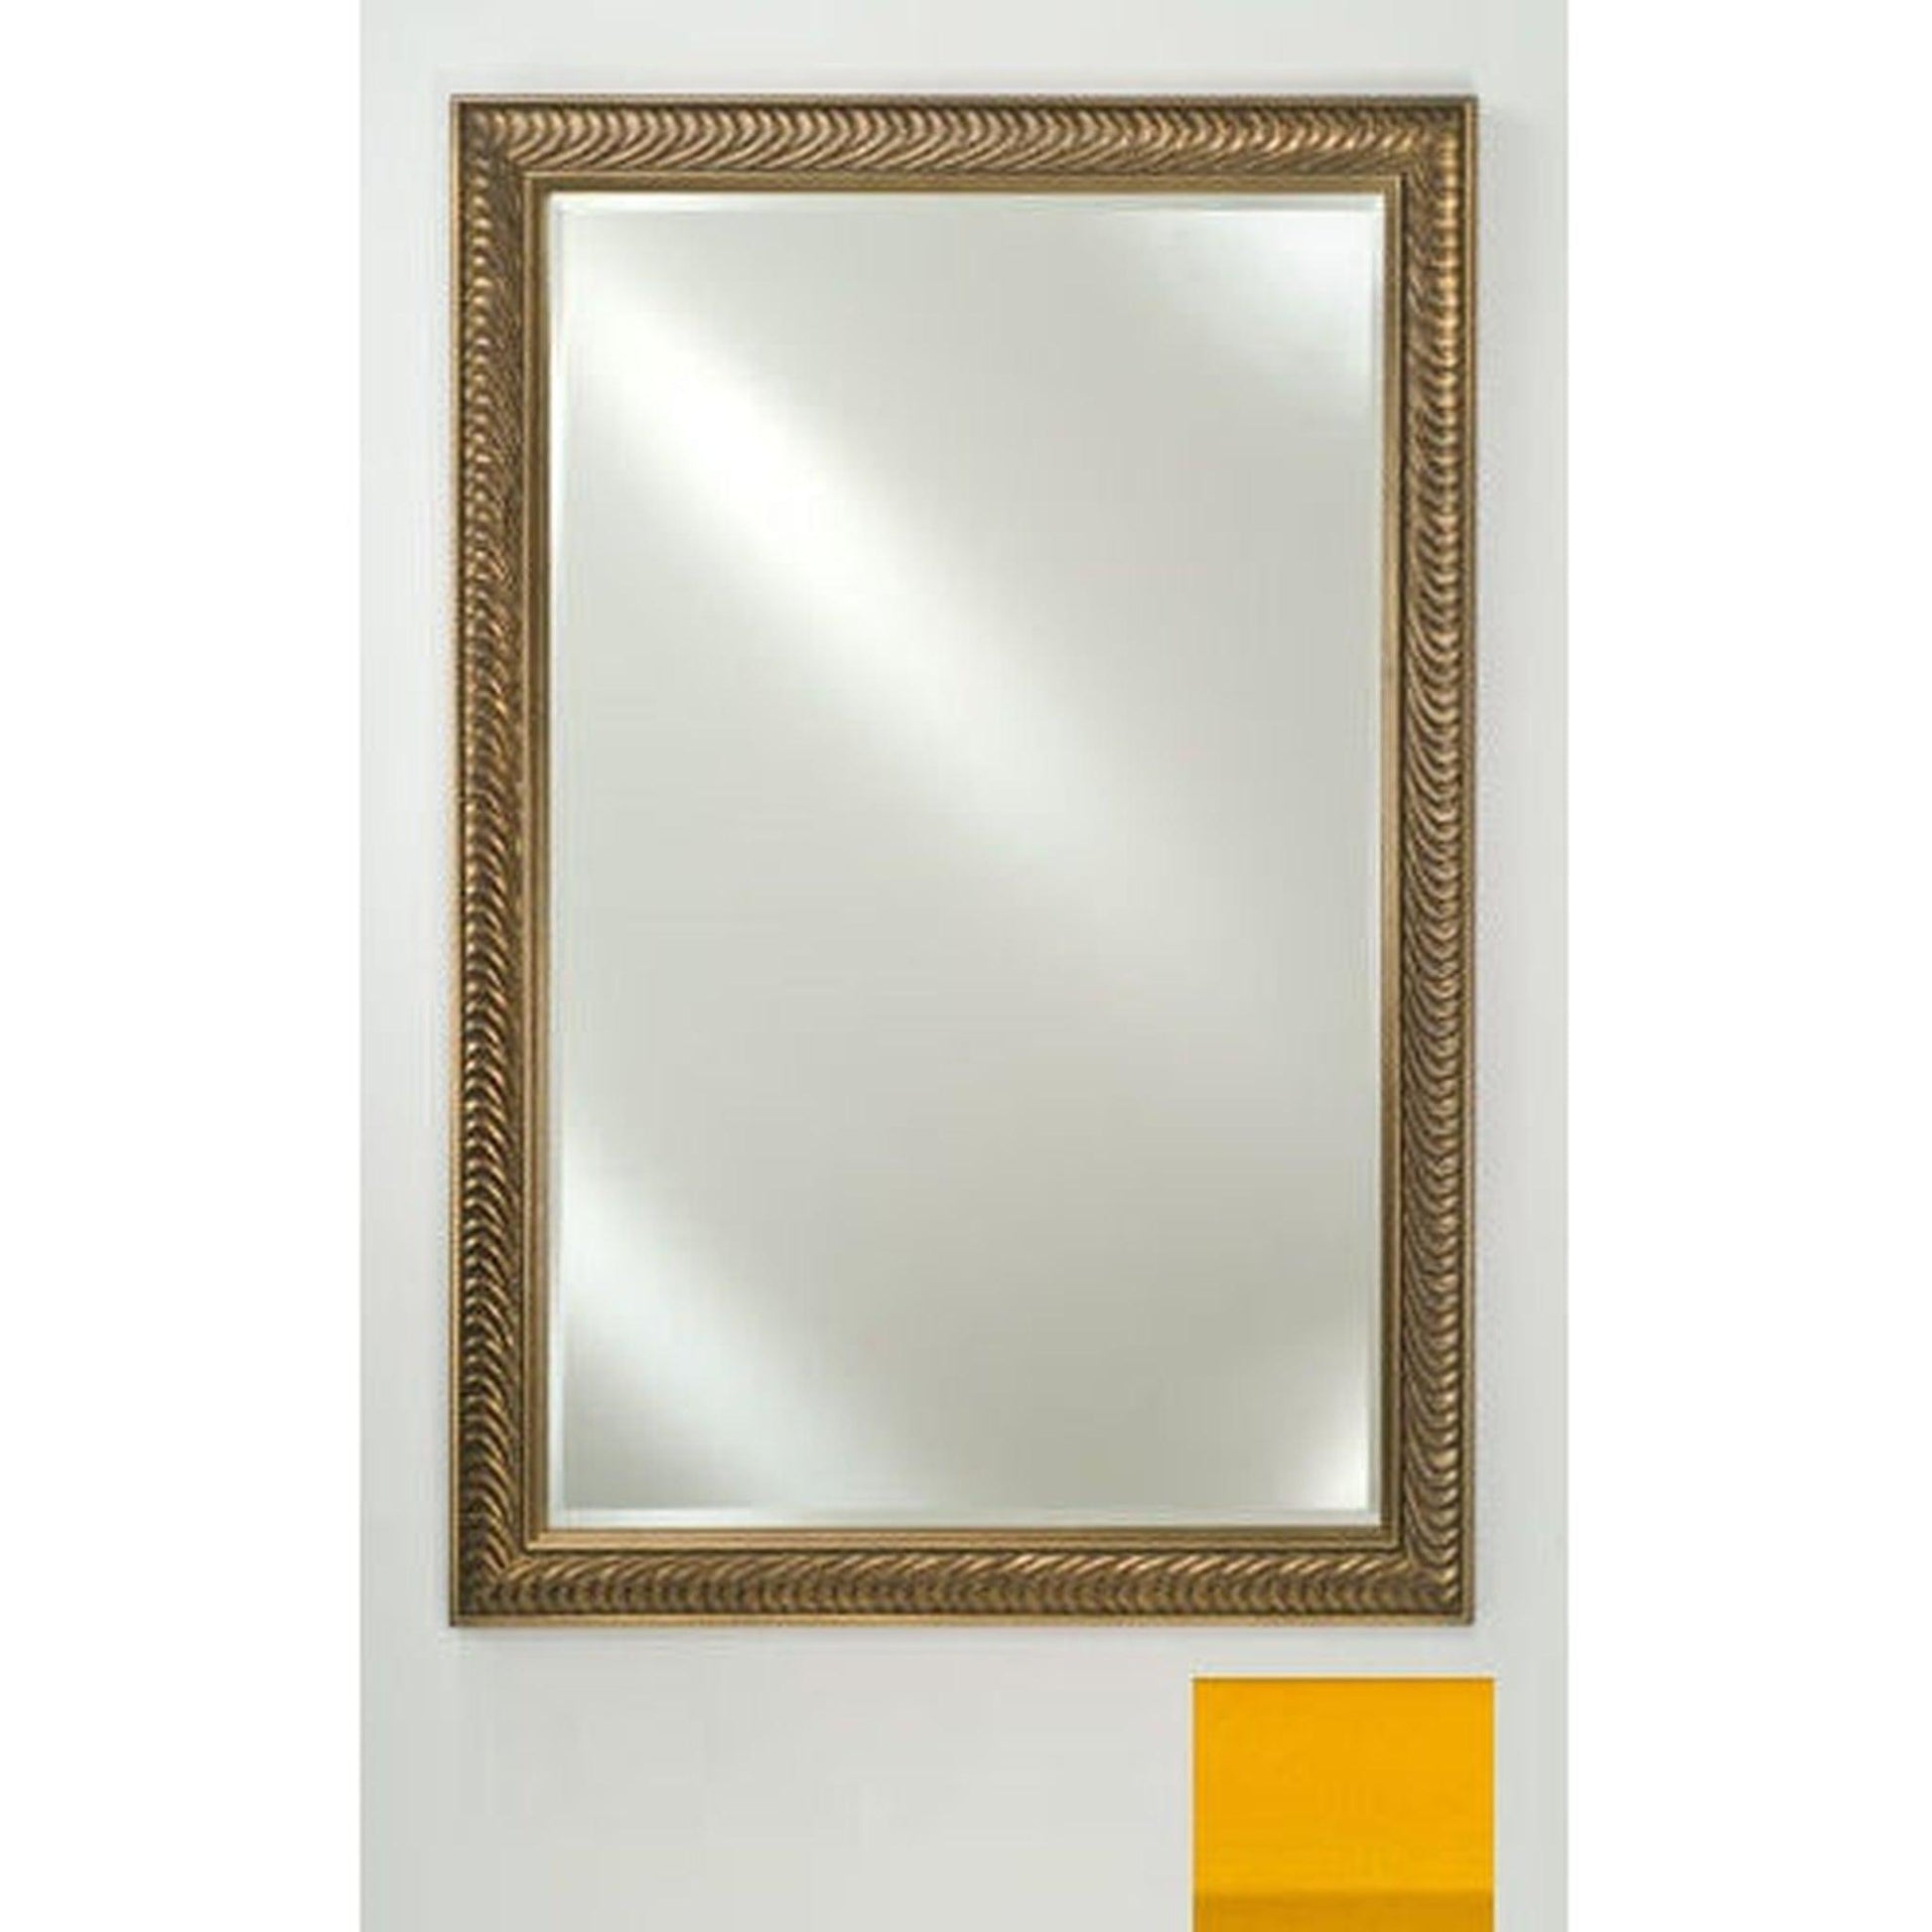 Afina Signature 20" x 26" Colorgrain Yellow Framed Mirror With Beveled Edge